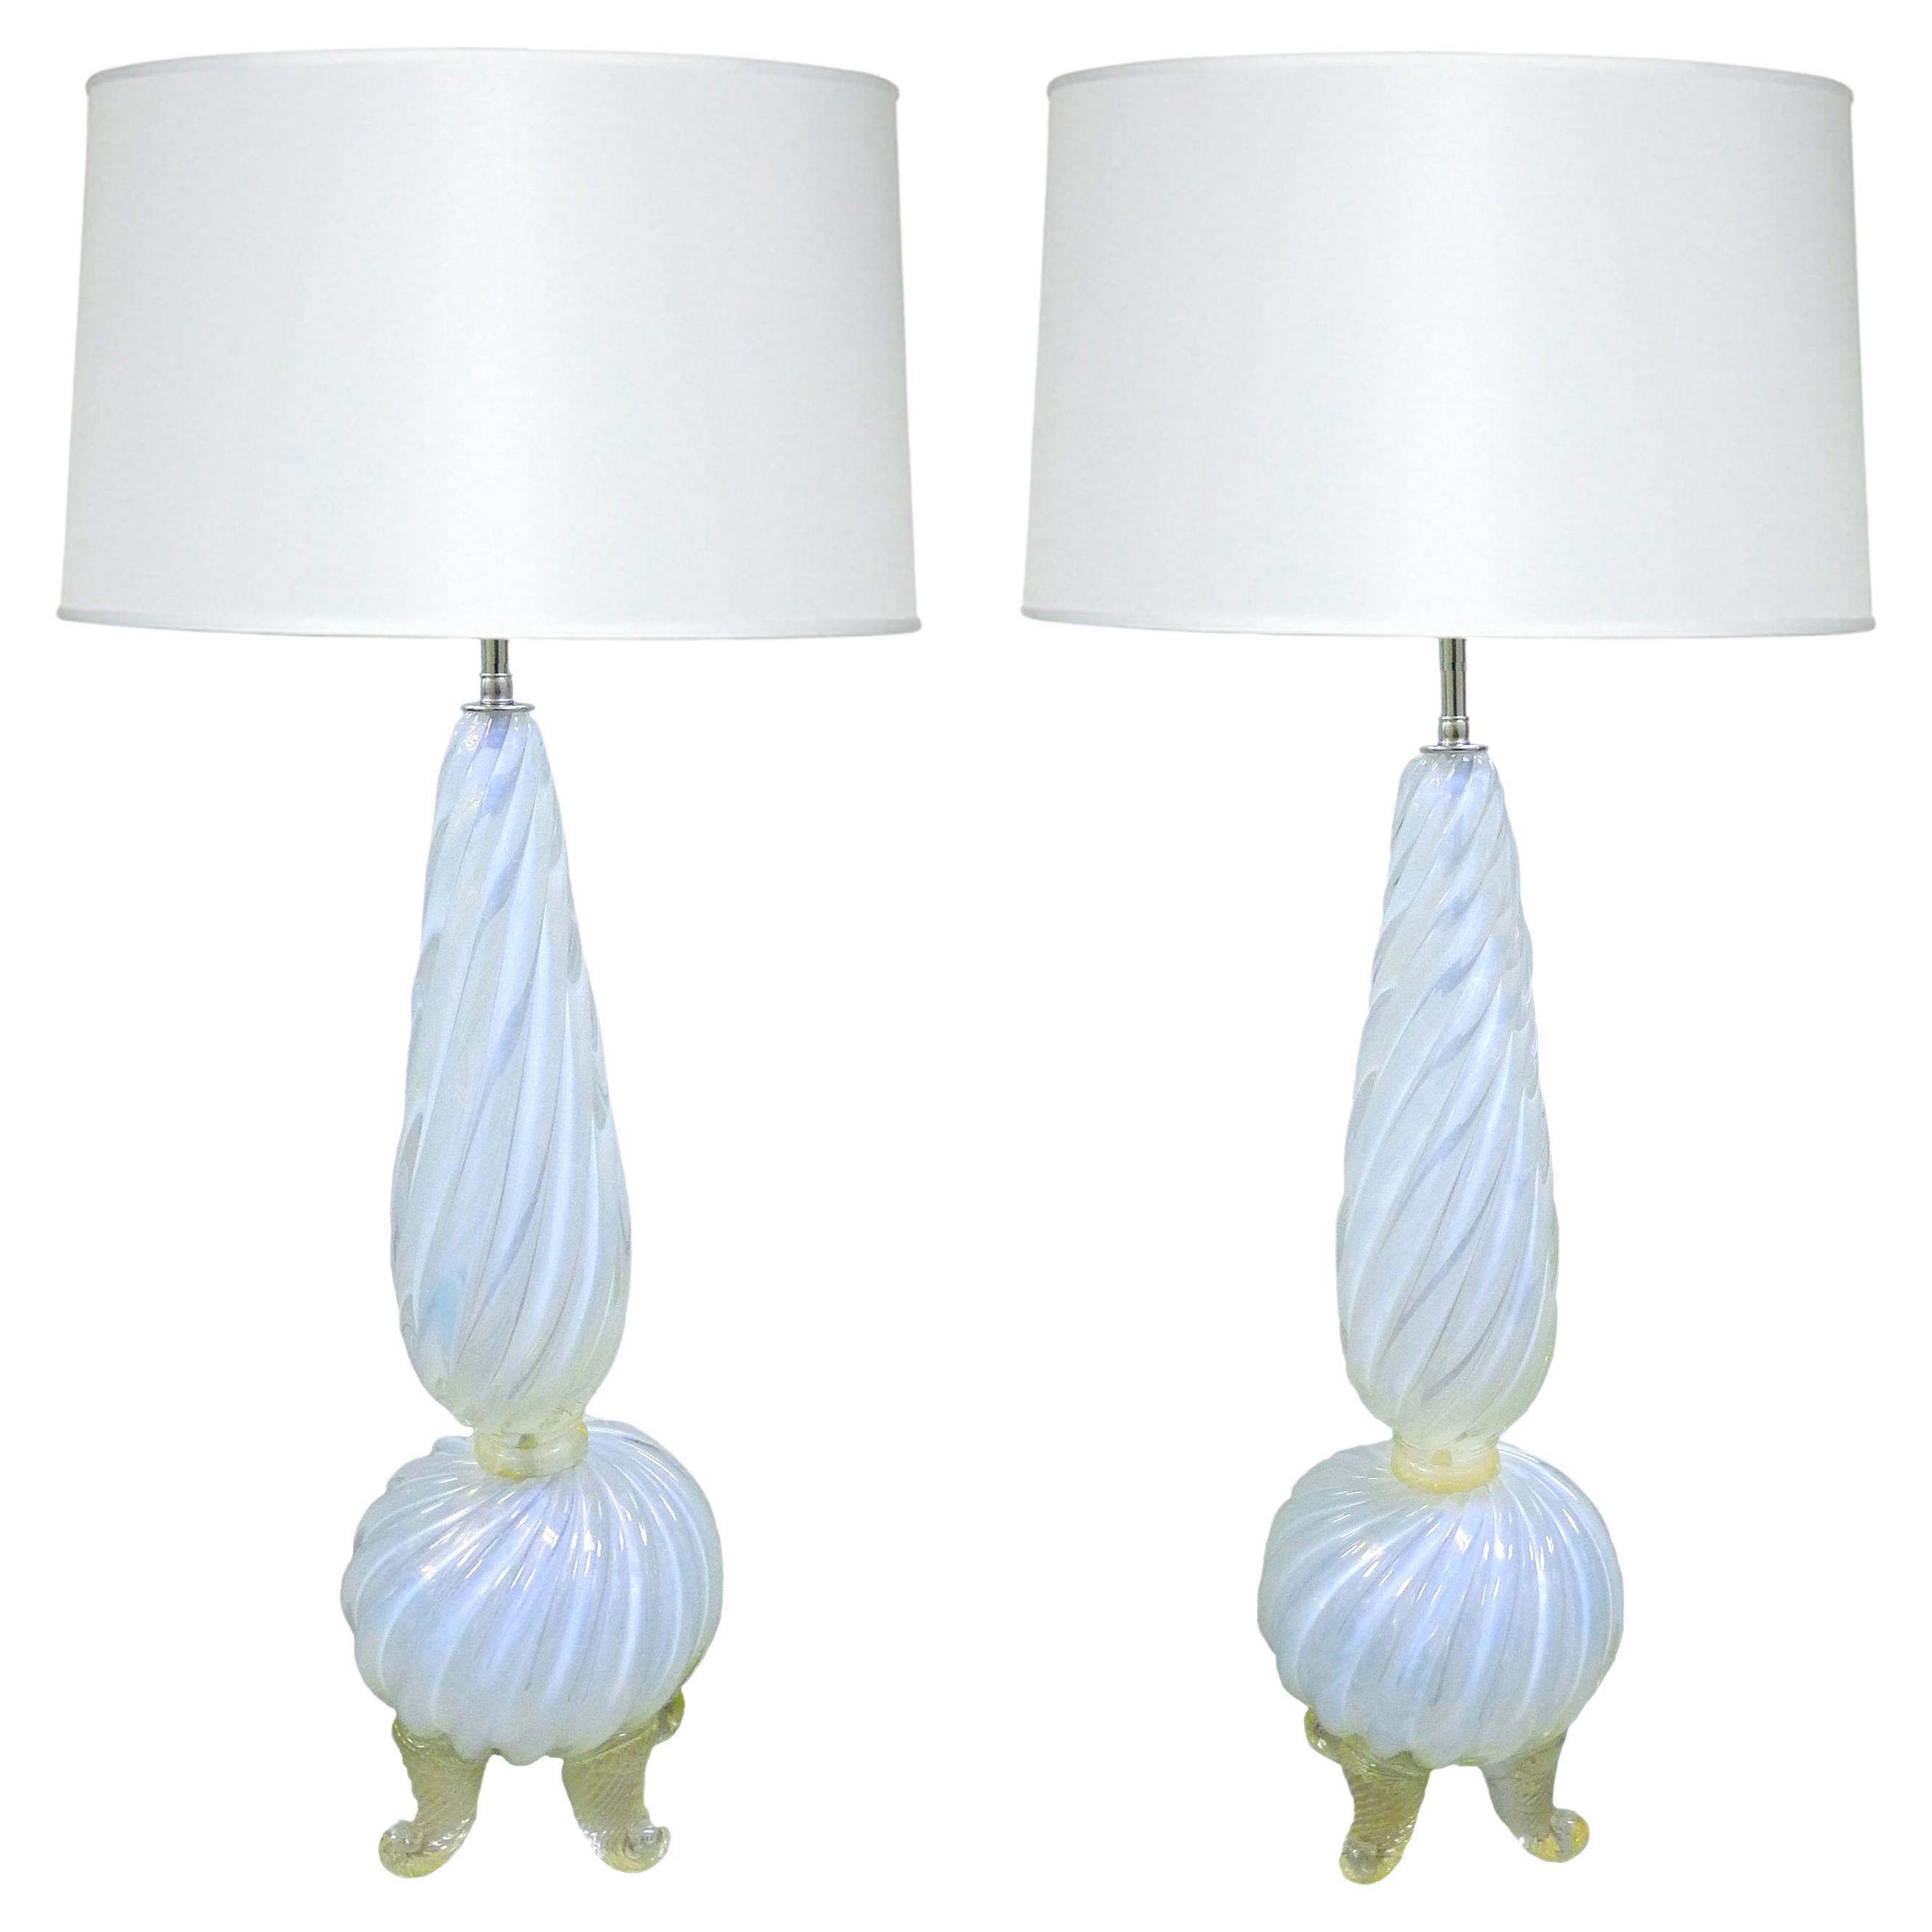 Pair of Mid-Century Opalescent Murano Glass Lamps